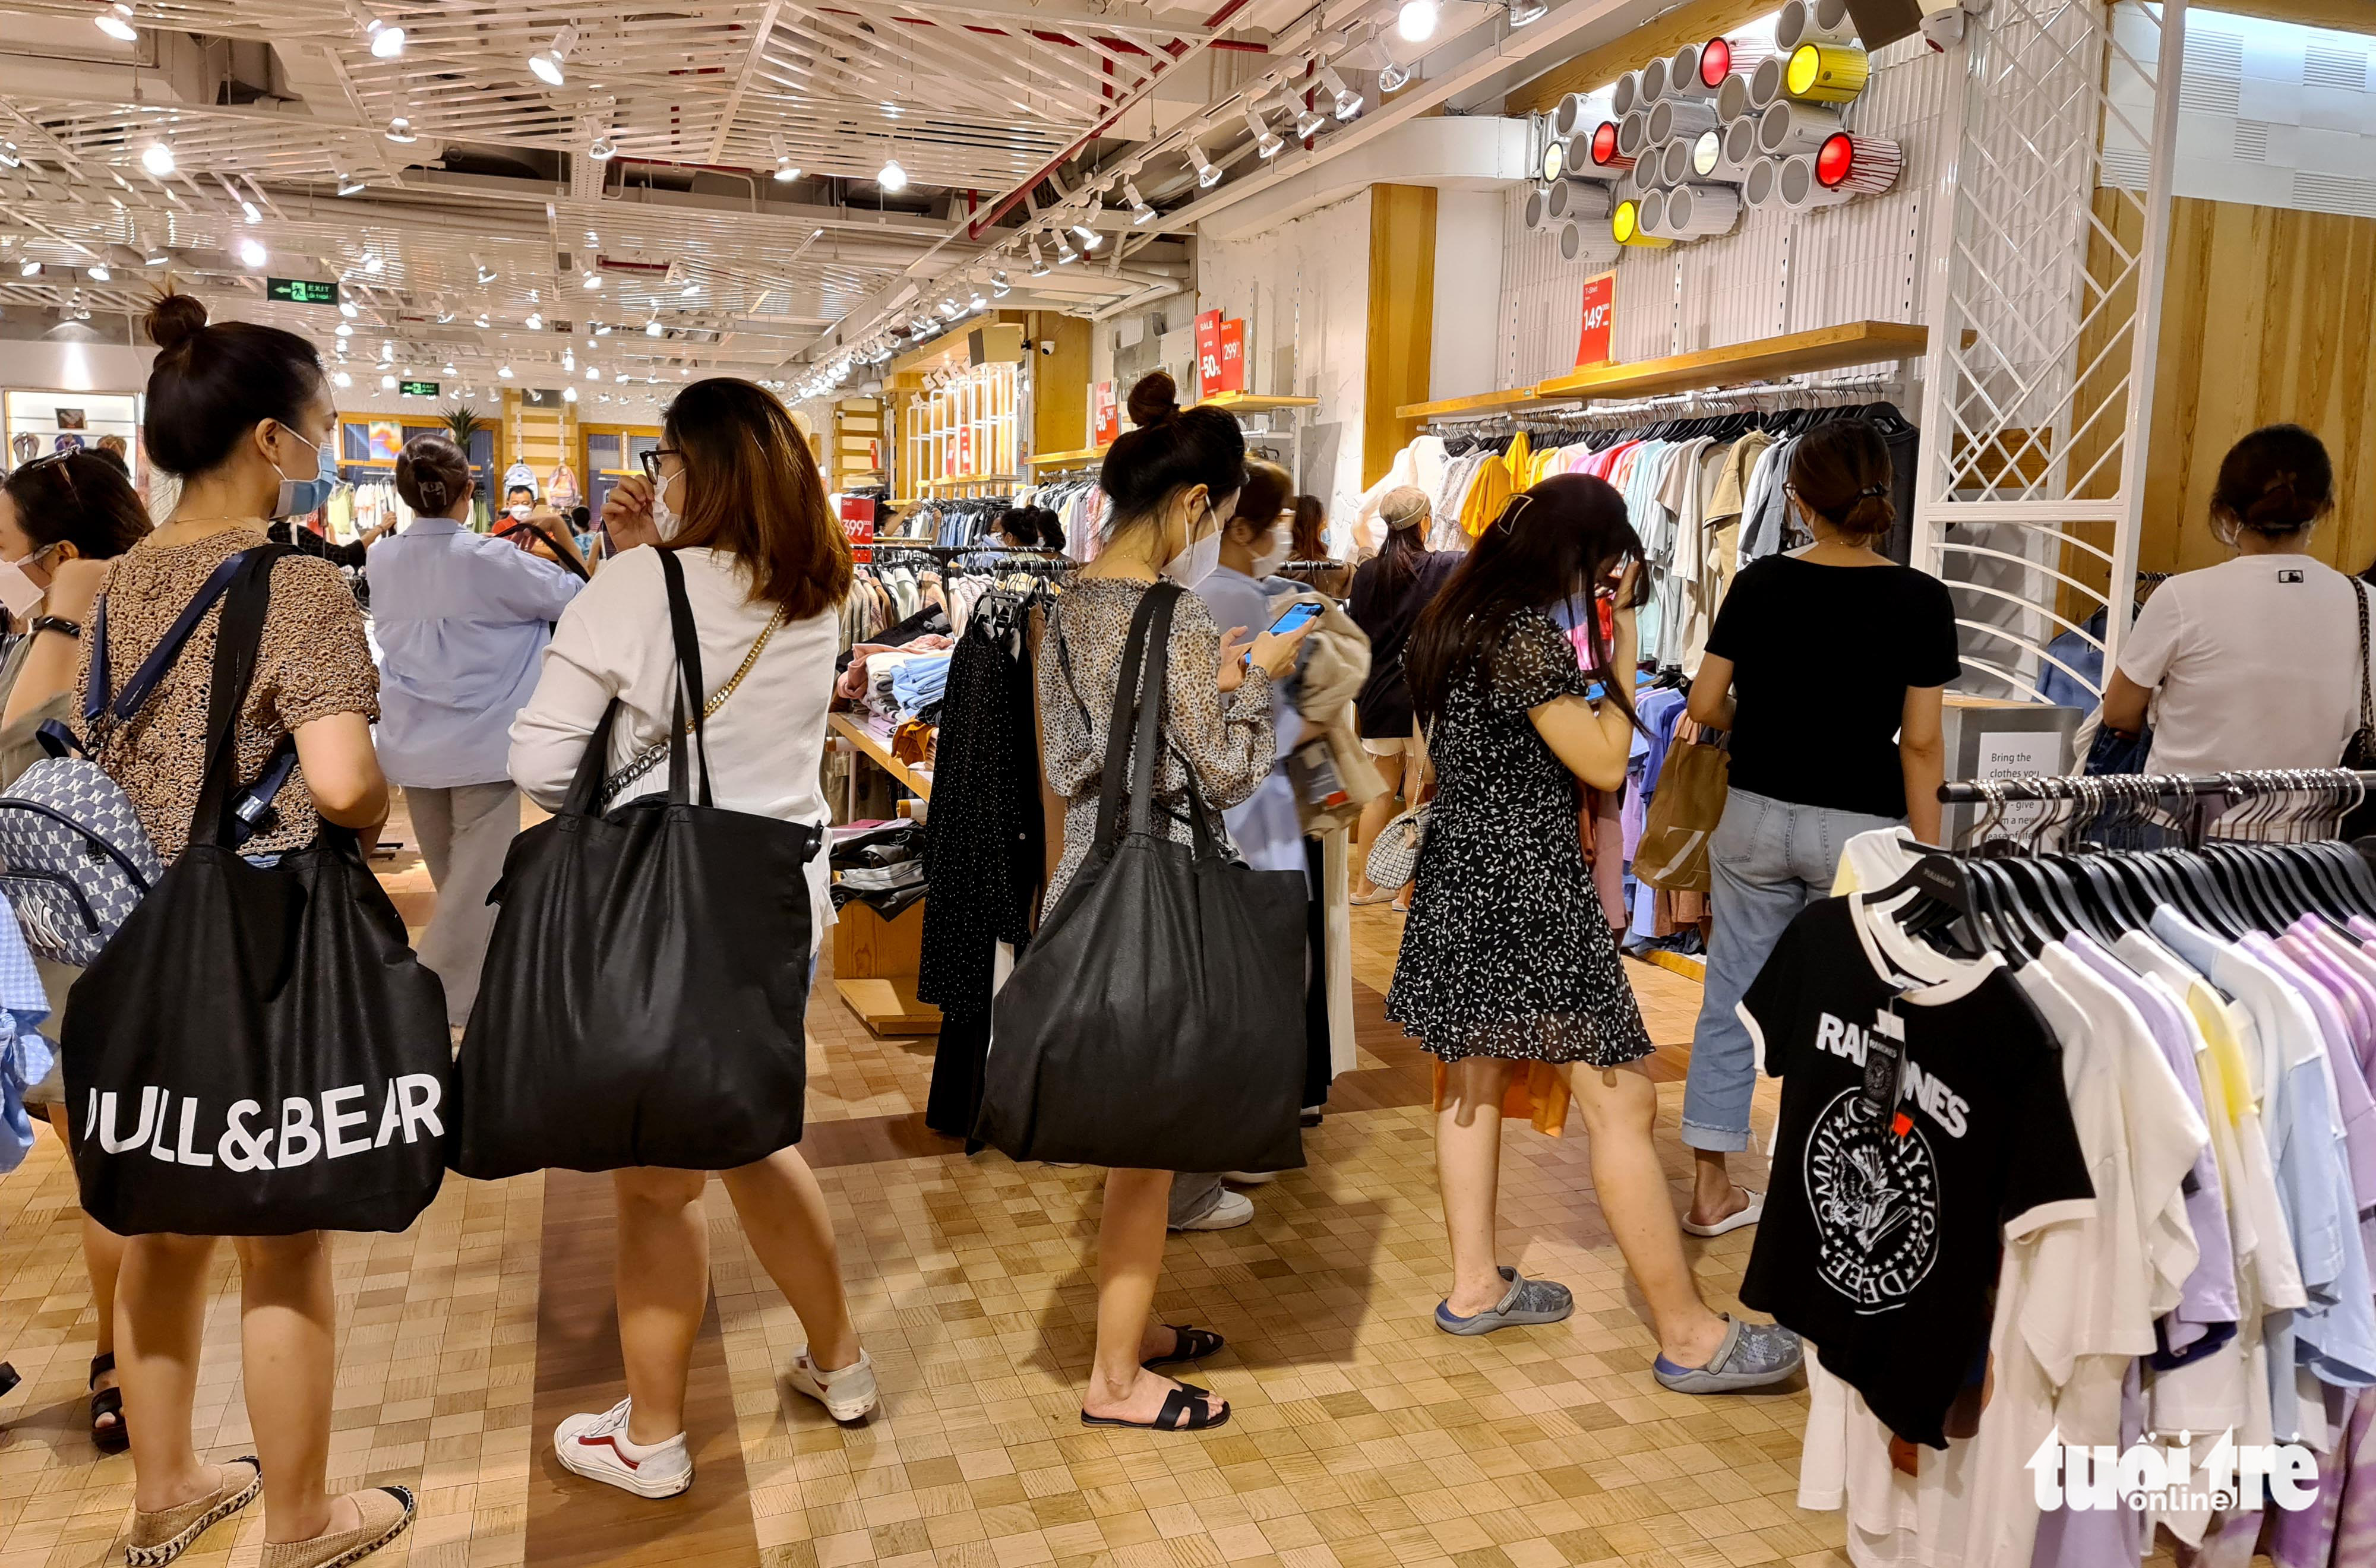 Shoppers wait at the fitting rooms inside a clothing store in District 1, Ho Chi Minh City, October 16, 2021. Photo: Ngoc Hien / Tuoi Tre